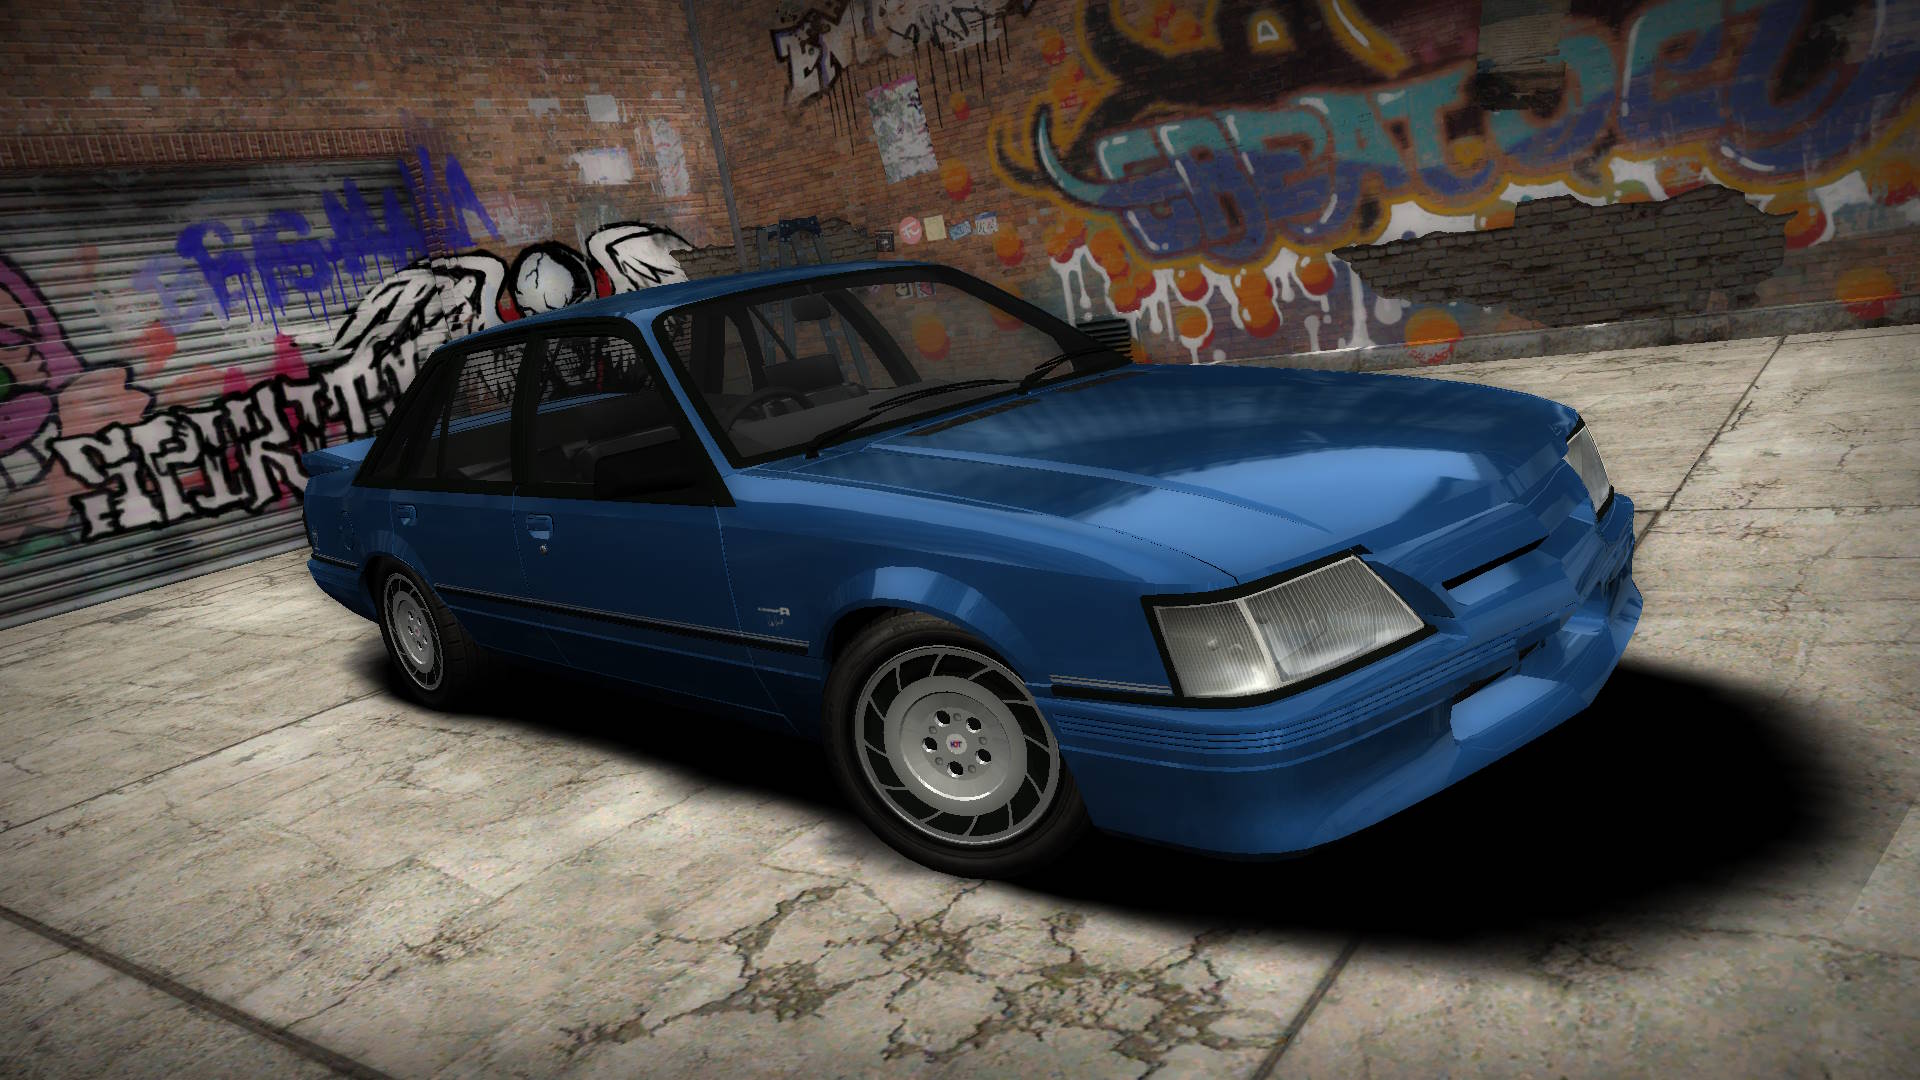 Need For Speed Most Wanted 1985 Holden HDT Commodore Group A (Unlimiter v4 support)